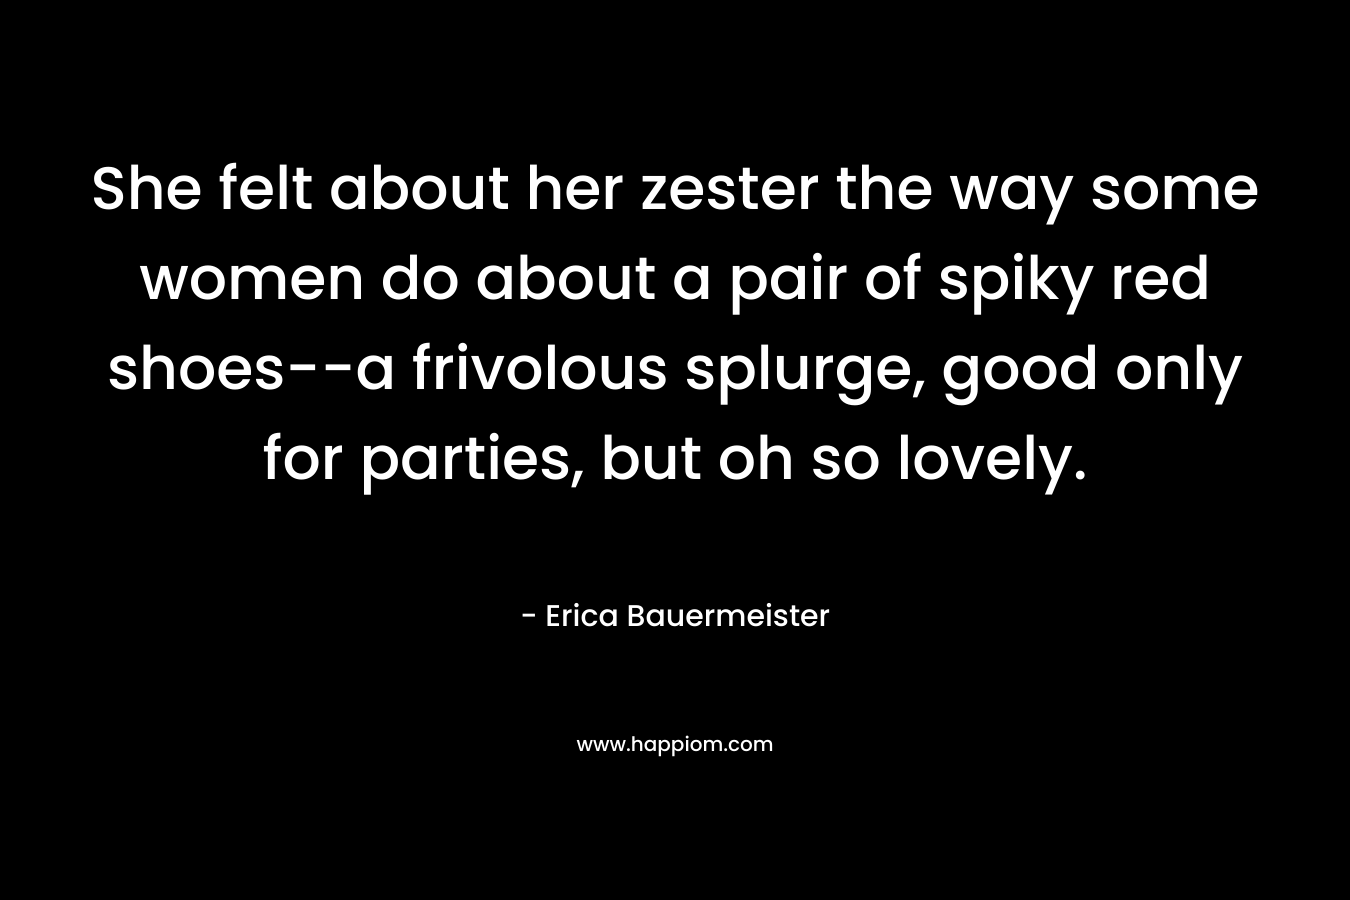 She felt about her zester the way some women do about a pair of spiky red shoes–a frivolous splurge, good only for parties, but oh so lovely. – Erica Bauermeister